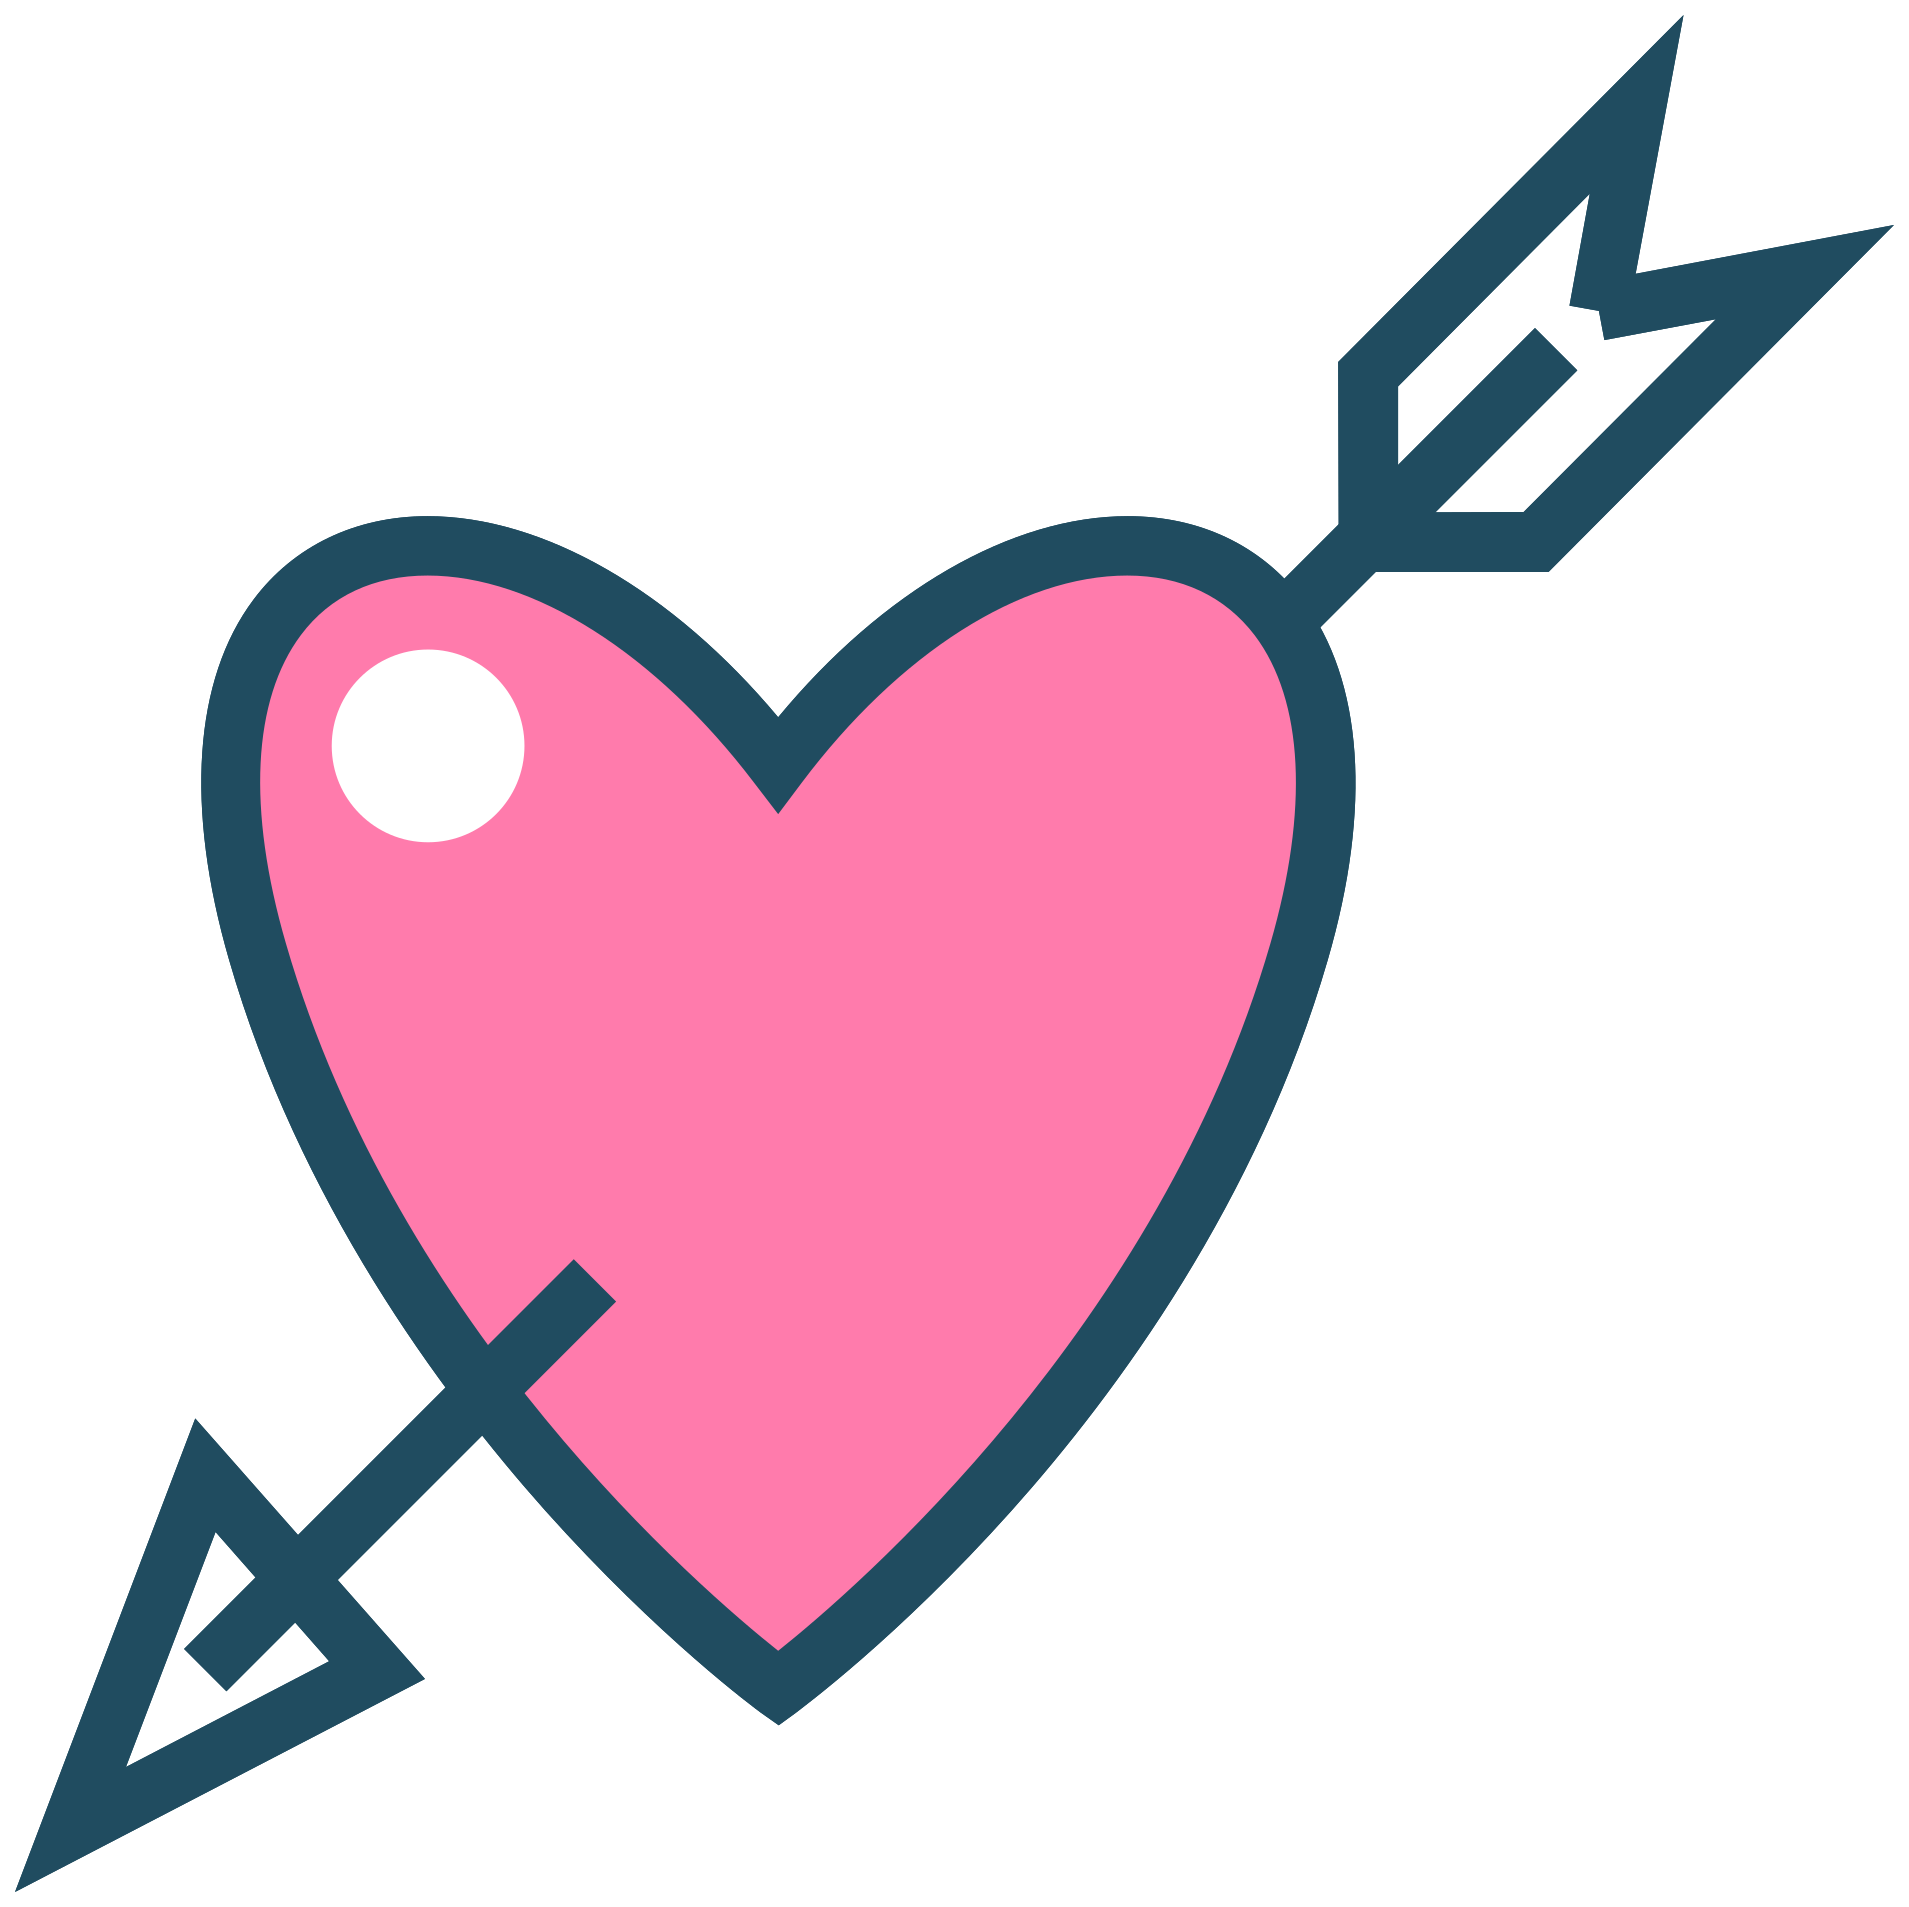 Heart Love Arrow Photos Free Clipart HQ PNG Image